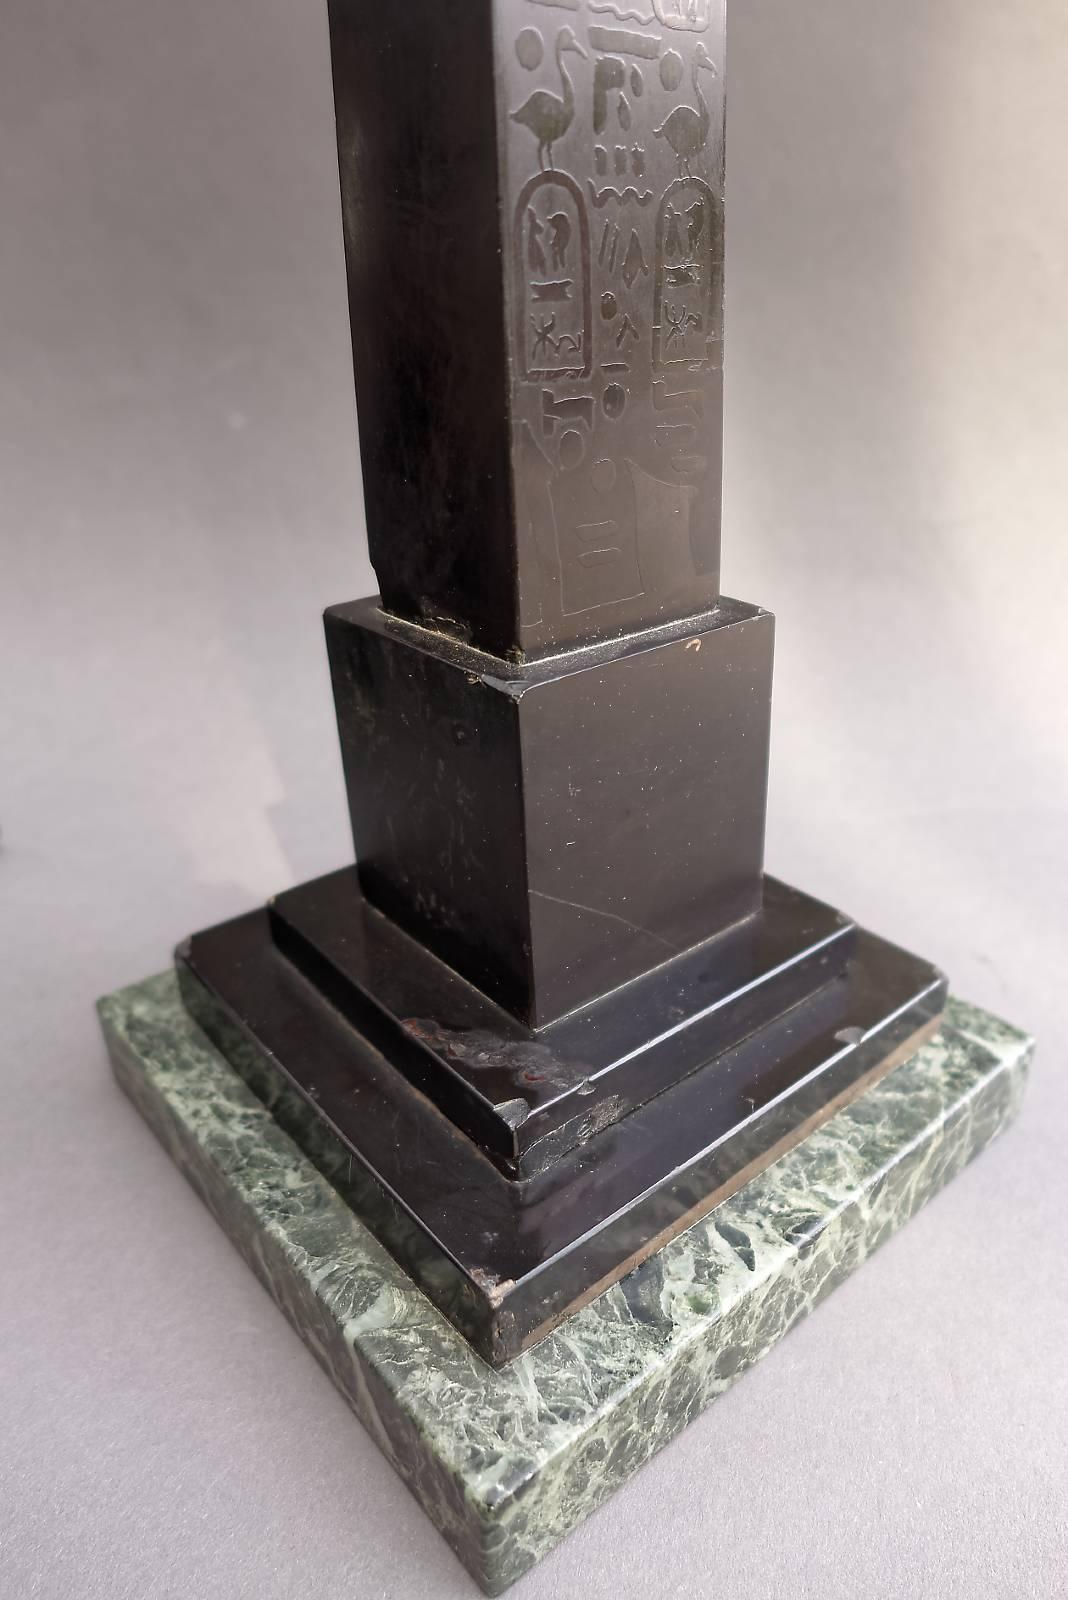 A very attractive pair of Italian Grand Tour black marble obelisks. Detailed hieroglyphics to the front side, on a green marble plinth. Minor corner chips to both obelisks, otherwise nice, original condition. 

The Grand Tour was an traditional